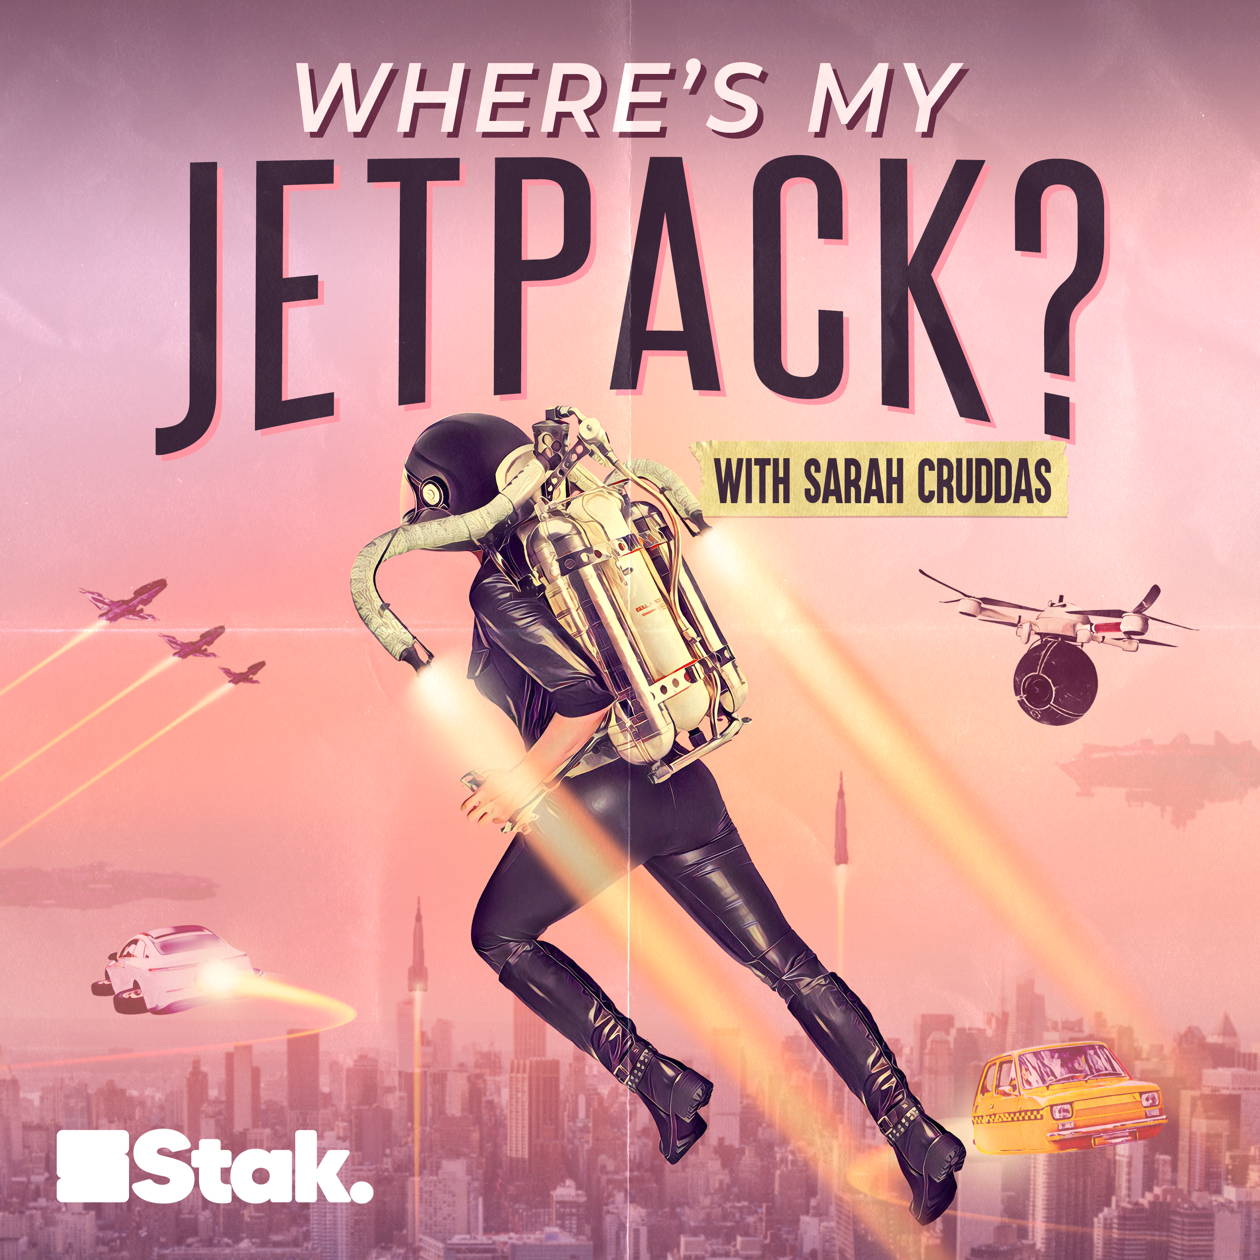 Artwork for the Where's My Jetpack? podcast.